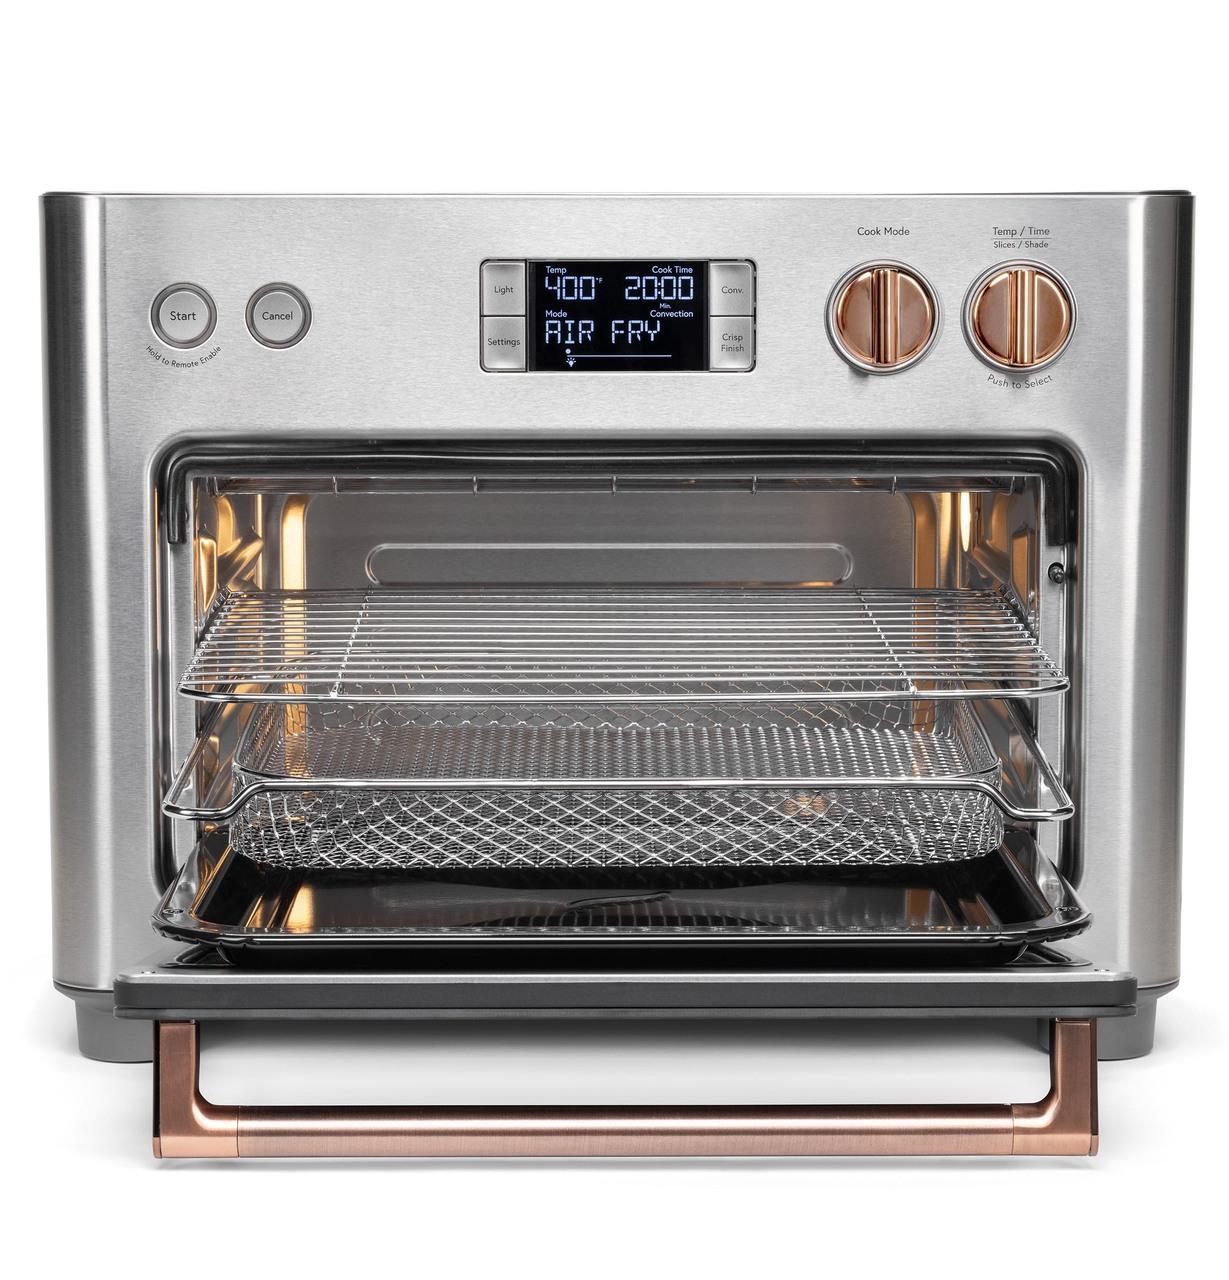 Cafe Caf(eback)™ Couture™ Oven with Air Fry